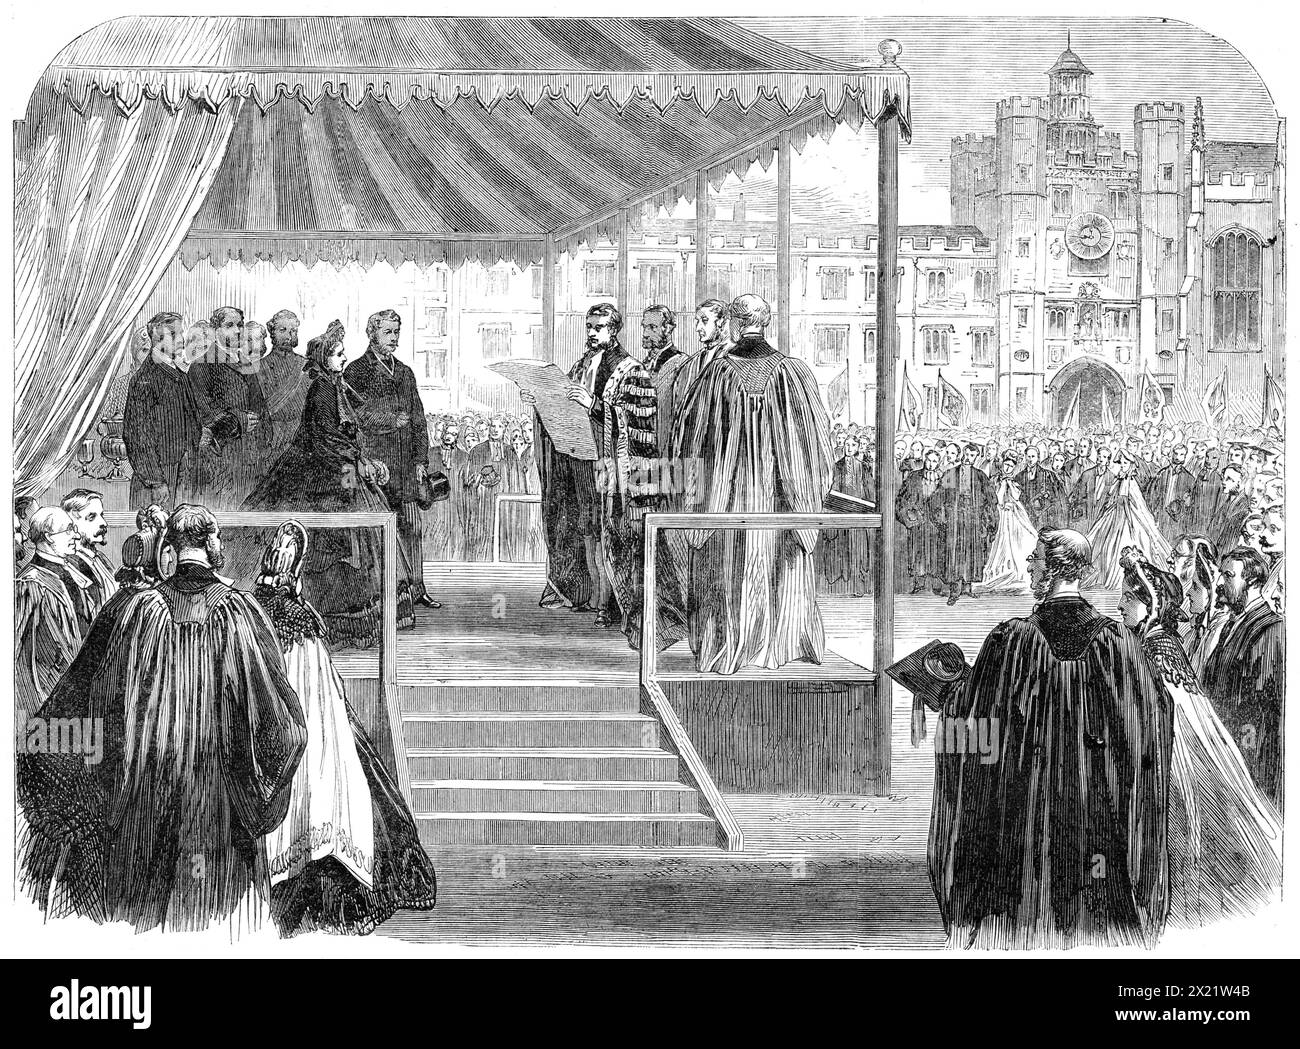 The Royal Visit to Cambridge: presentation of the university address to the Prince and Princess [of Wales] in the quadrangle of Trinity College, 1864. '...their Royal Highnesses [ie the future King Edward VII and Queen Alexandra] were conducted to a platform erected under a marquee beneath the shadow of the dining-hall. Here the Duke of Devonshire (Chancellor, of the University), the Vice-Chancellor (Dr. Cookson), the heads of houses, professors, and members of the Senate were assembled to present a formal address to the Prince of Wales. The Prince read a short reply, in which he acknowledged Stock Photo